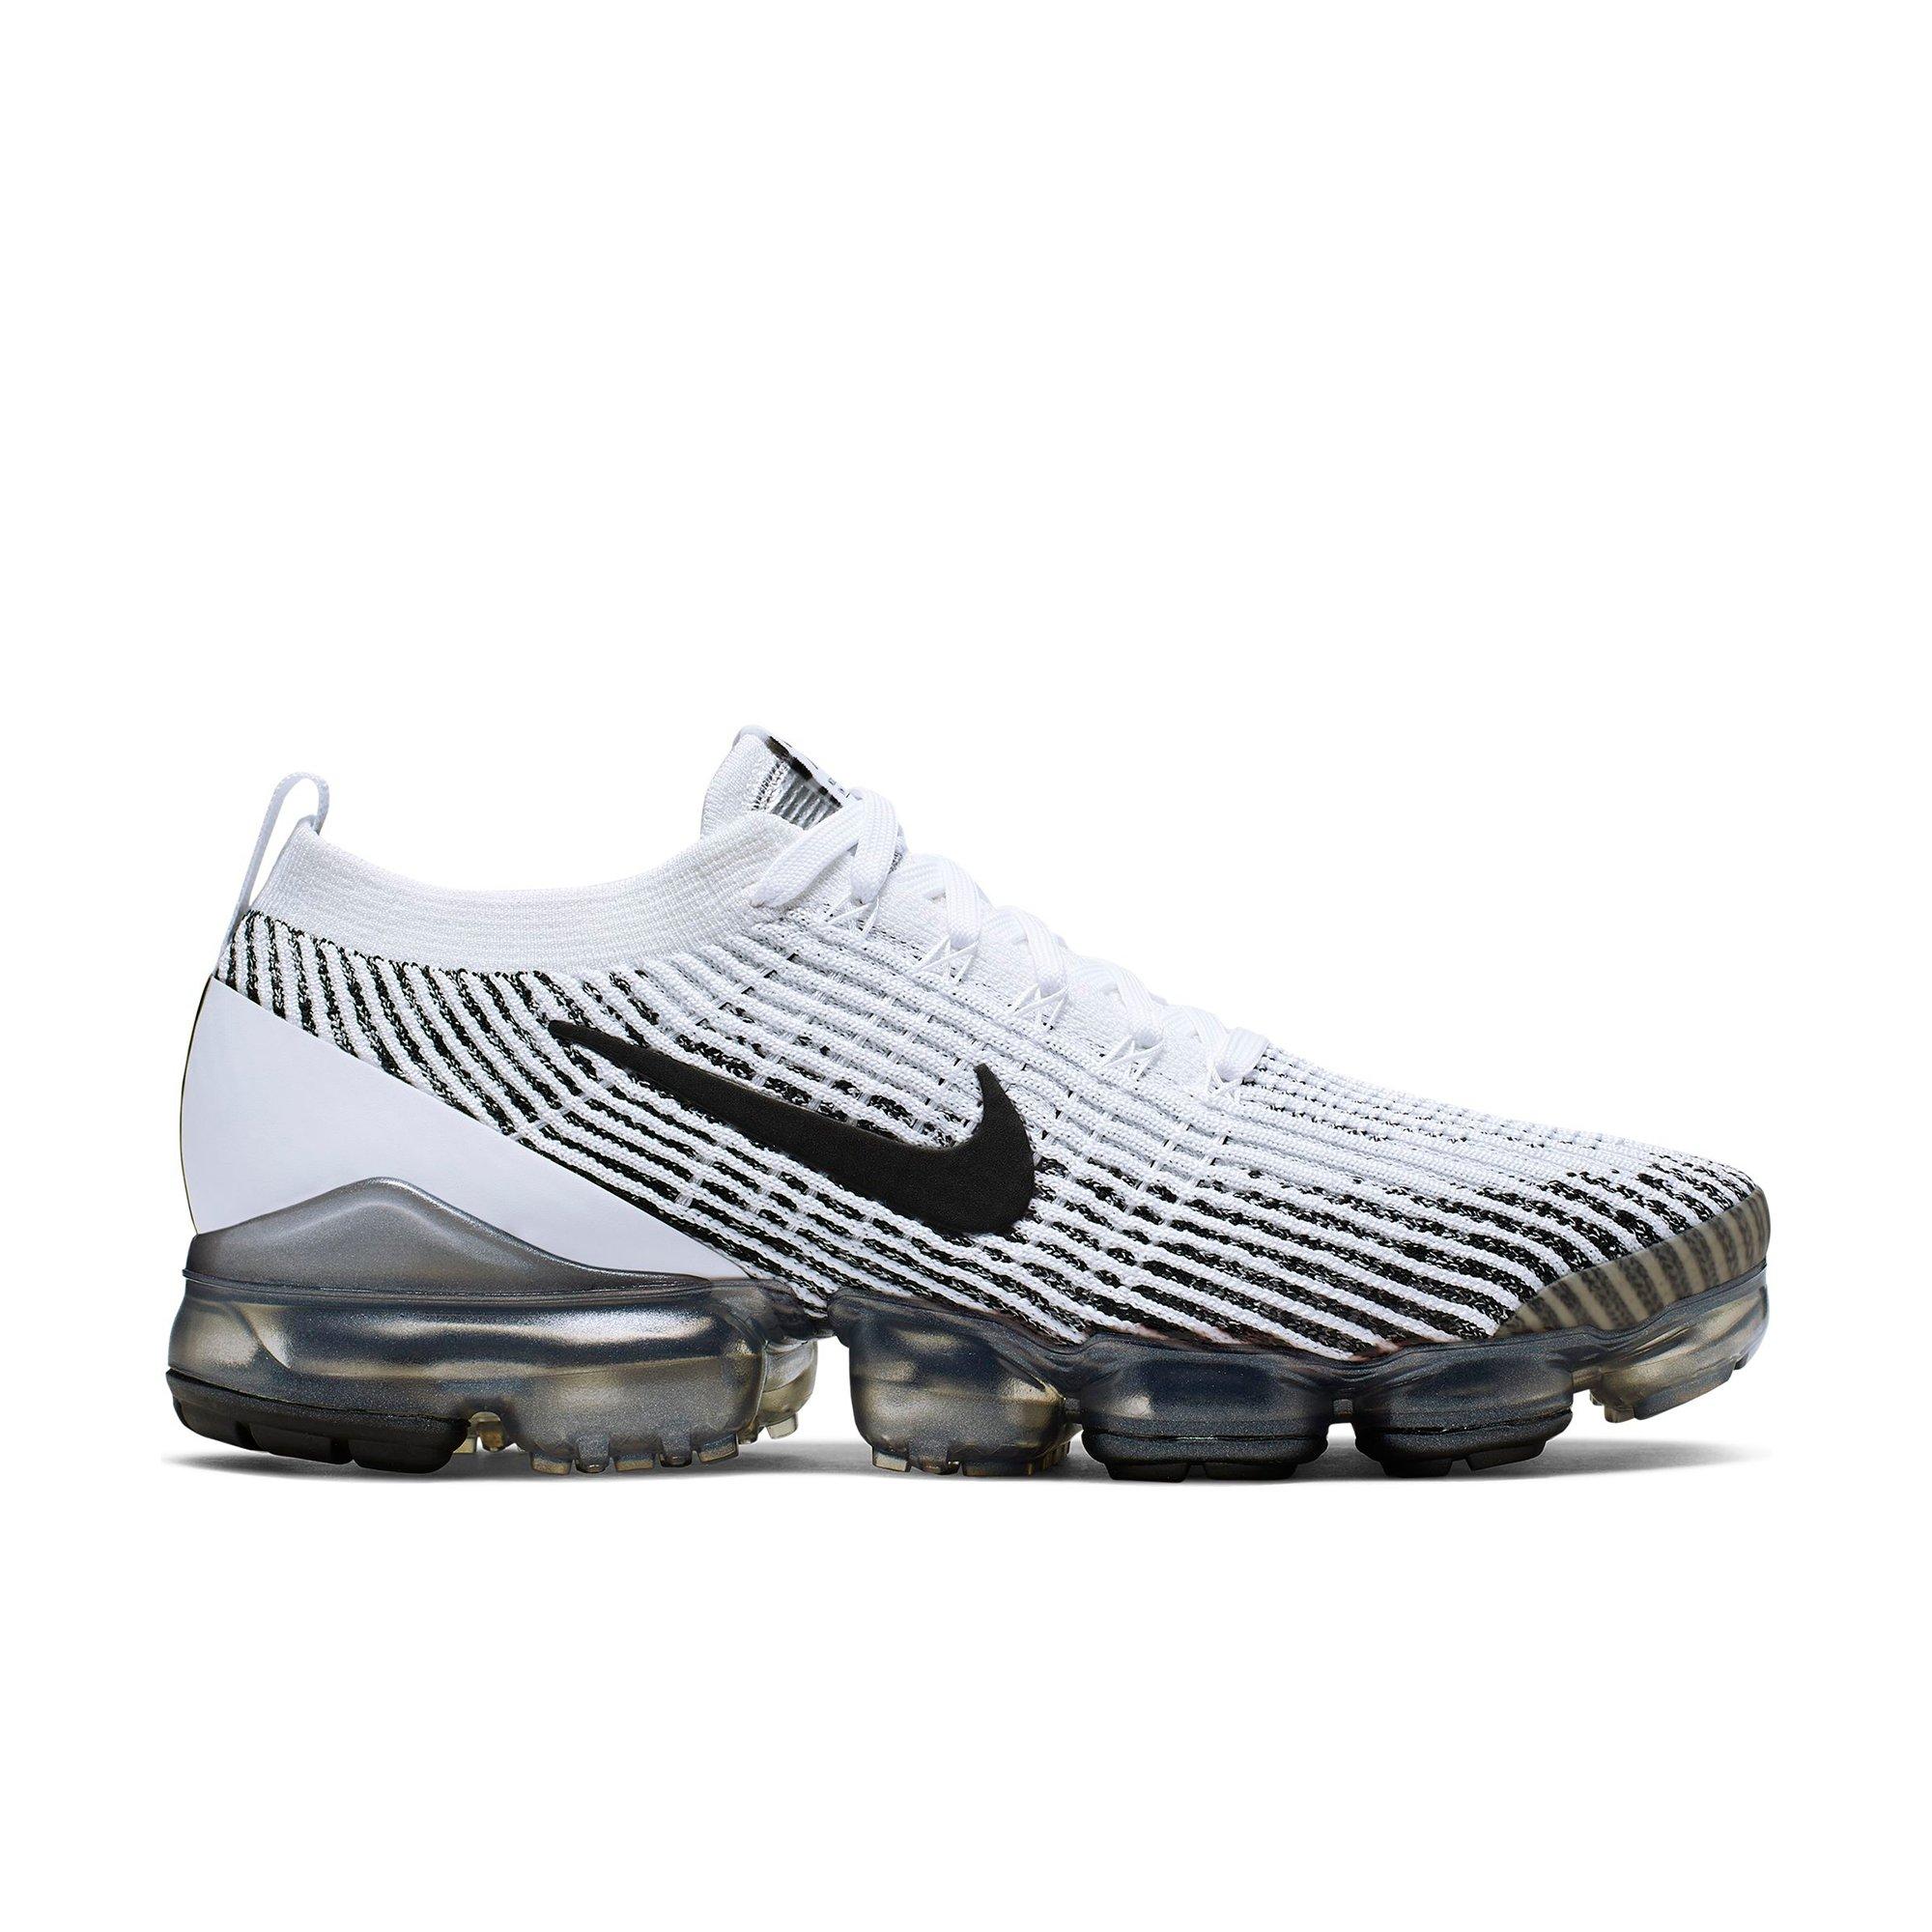 flyknit vapormax black and white